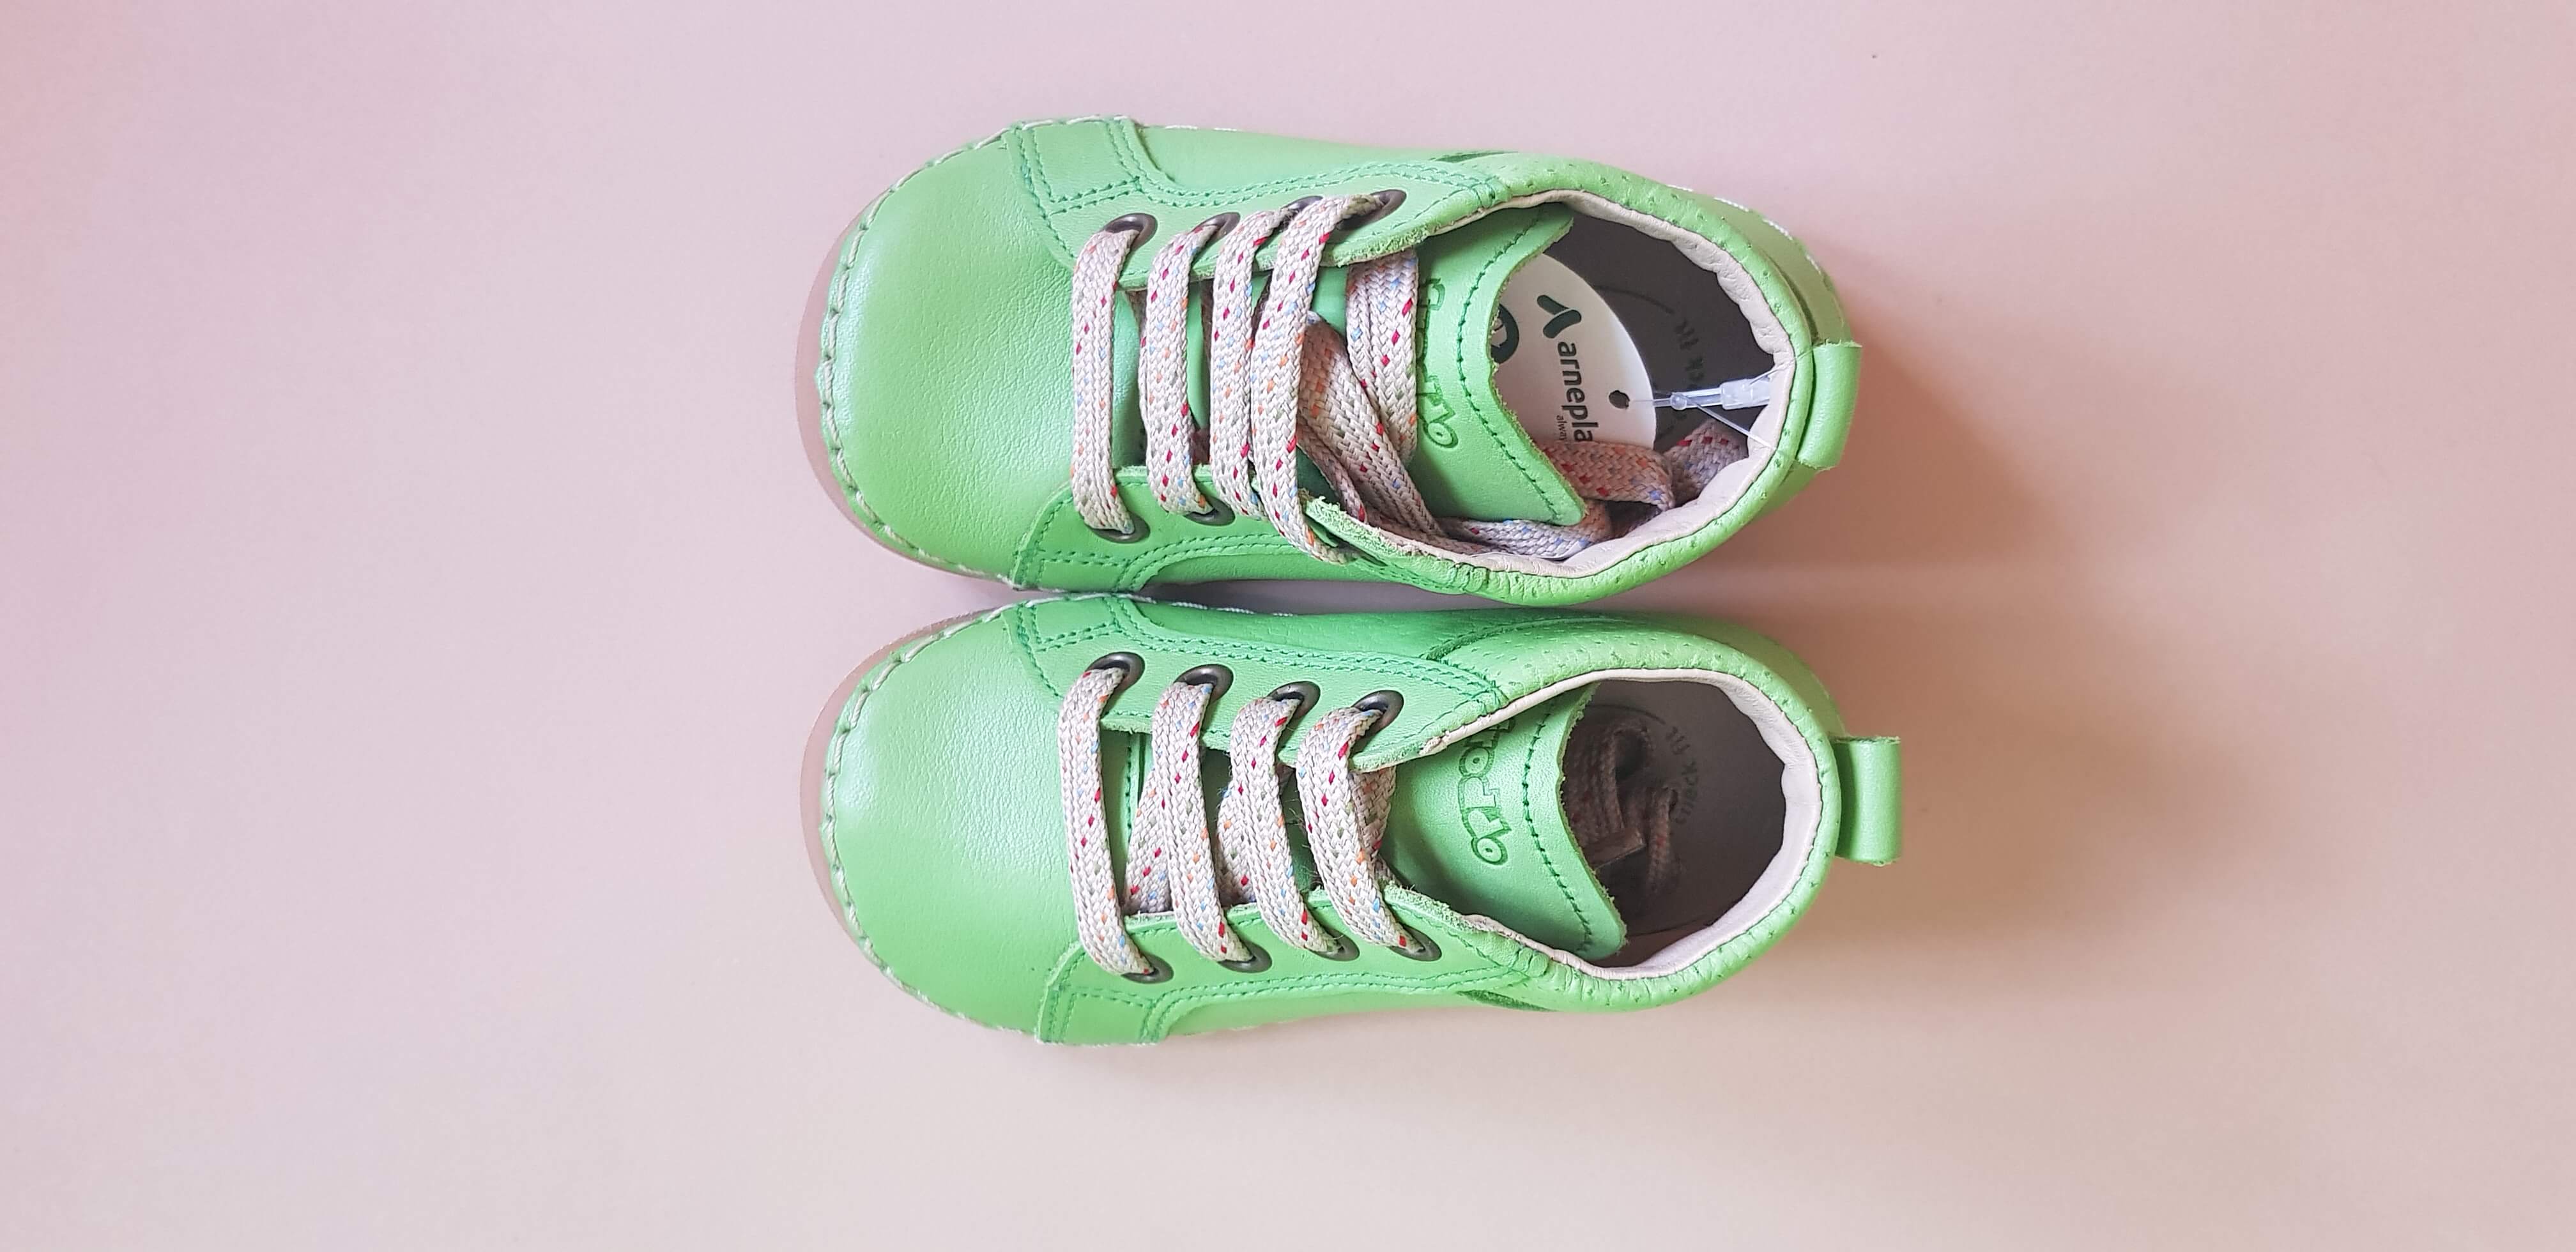 Preschool Shoes with Laces - Green